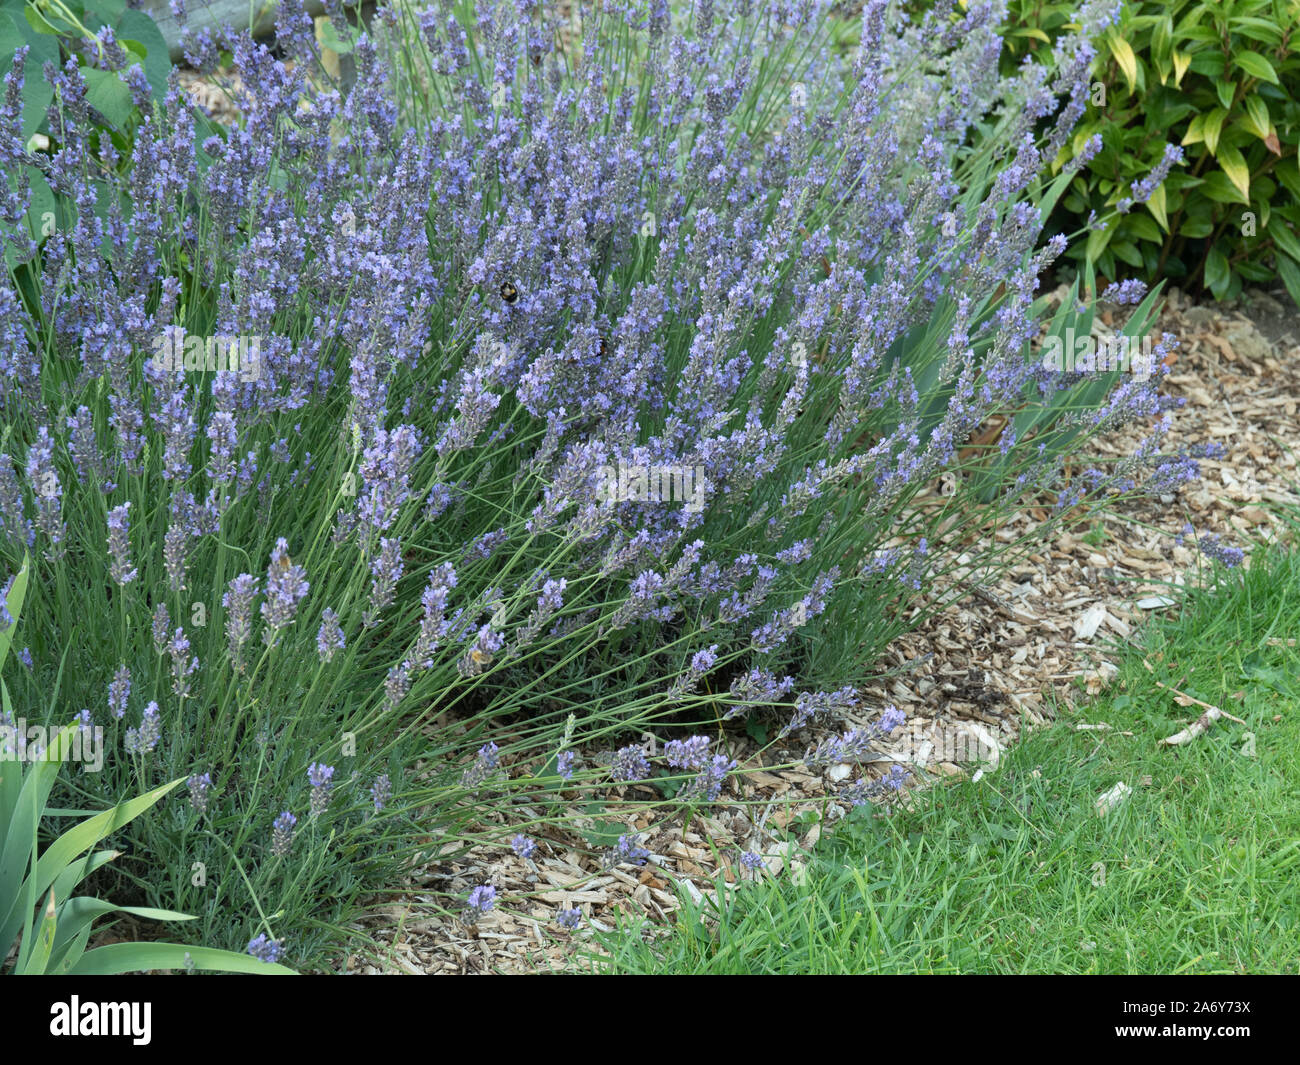 A close up of a hedge of Lavender Hidcote showing the violet flower spikes Stock Photo